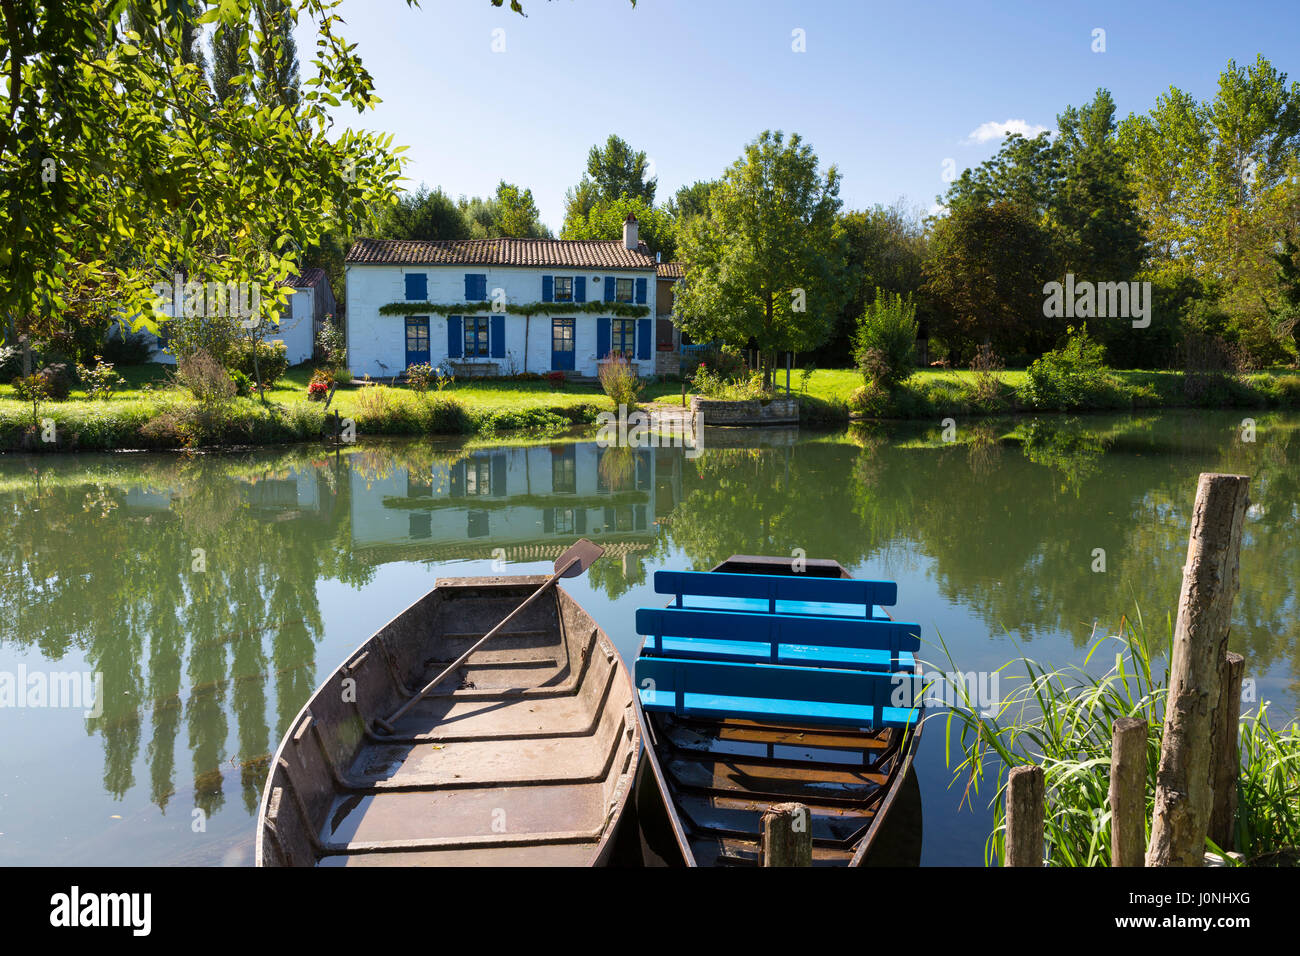 Rowing boats and house by River La Sevre-Niortaise in Coulon in Marais Poitrevin region, Grand Site de France Stock Photo